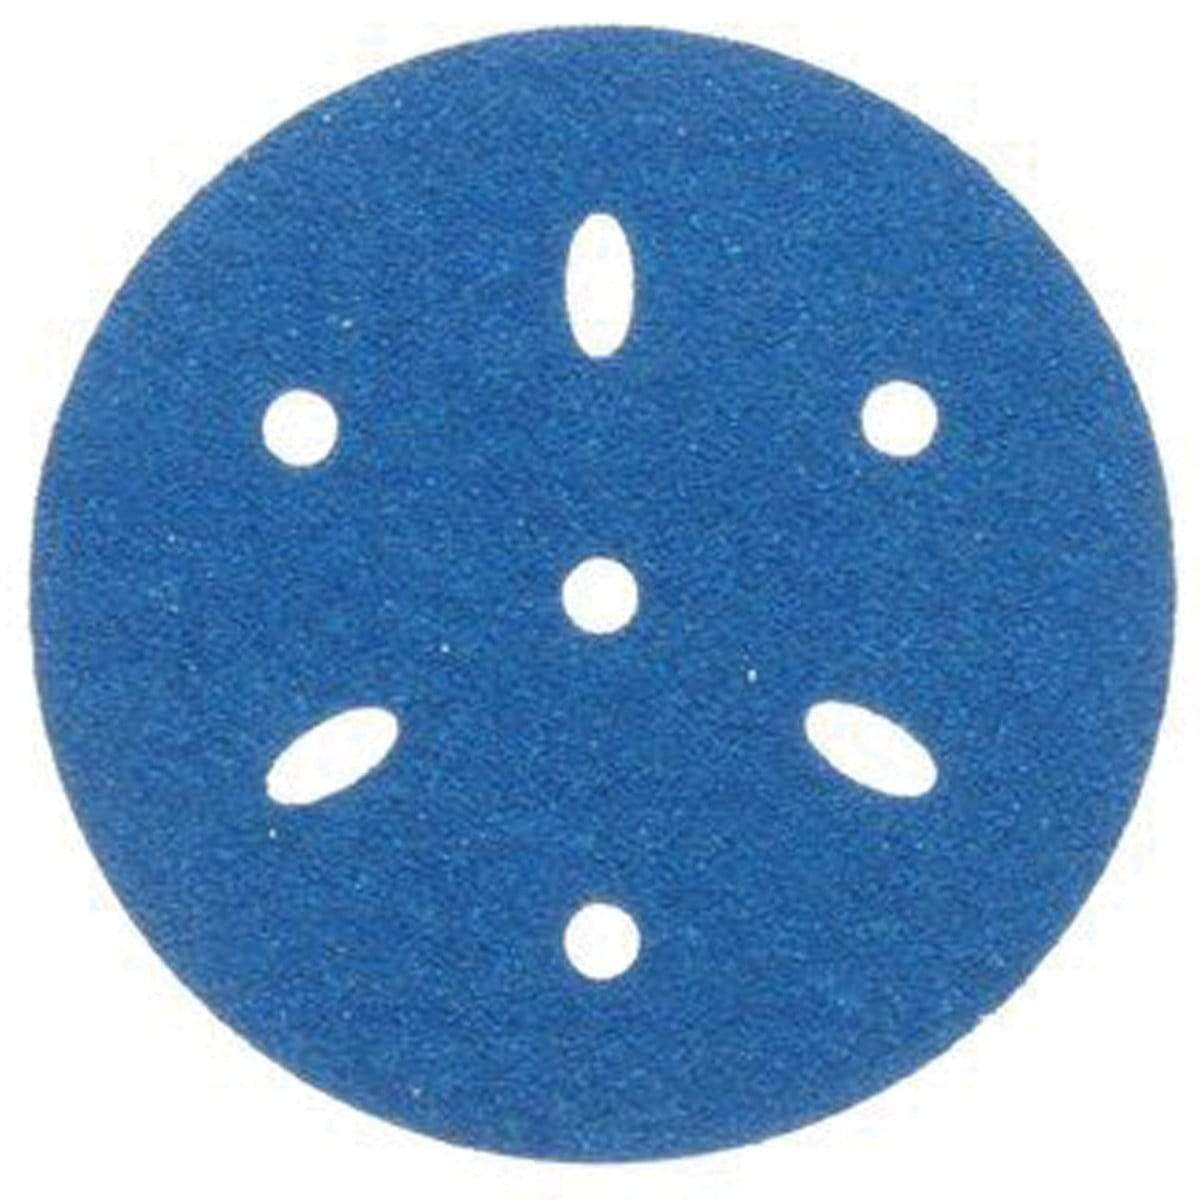 3M Marine Qualifies for Free Shipping 3M Hookit Blue Sandpaper 5" Disc 220 Multi-Hole 50/Bx #36162